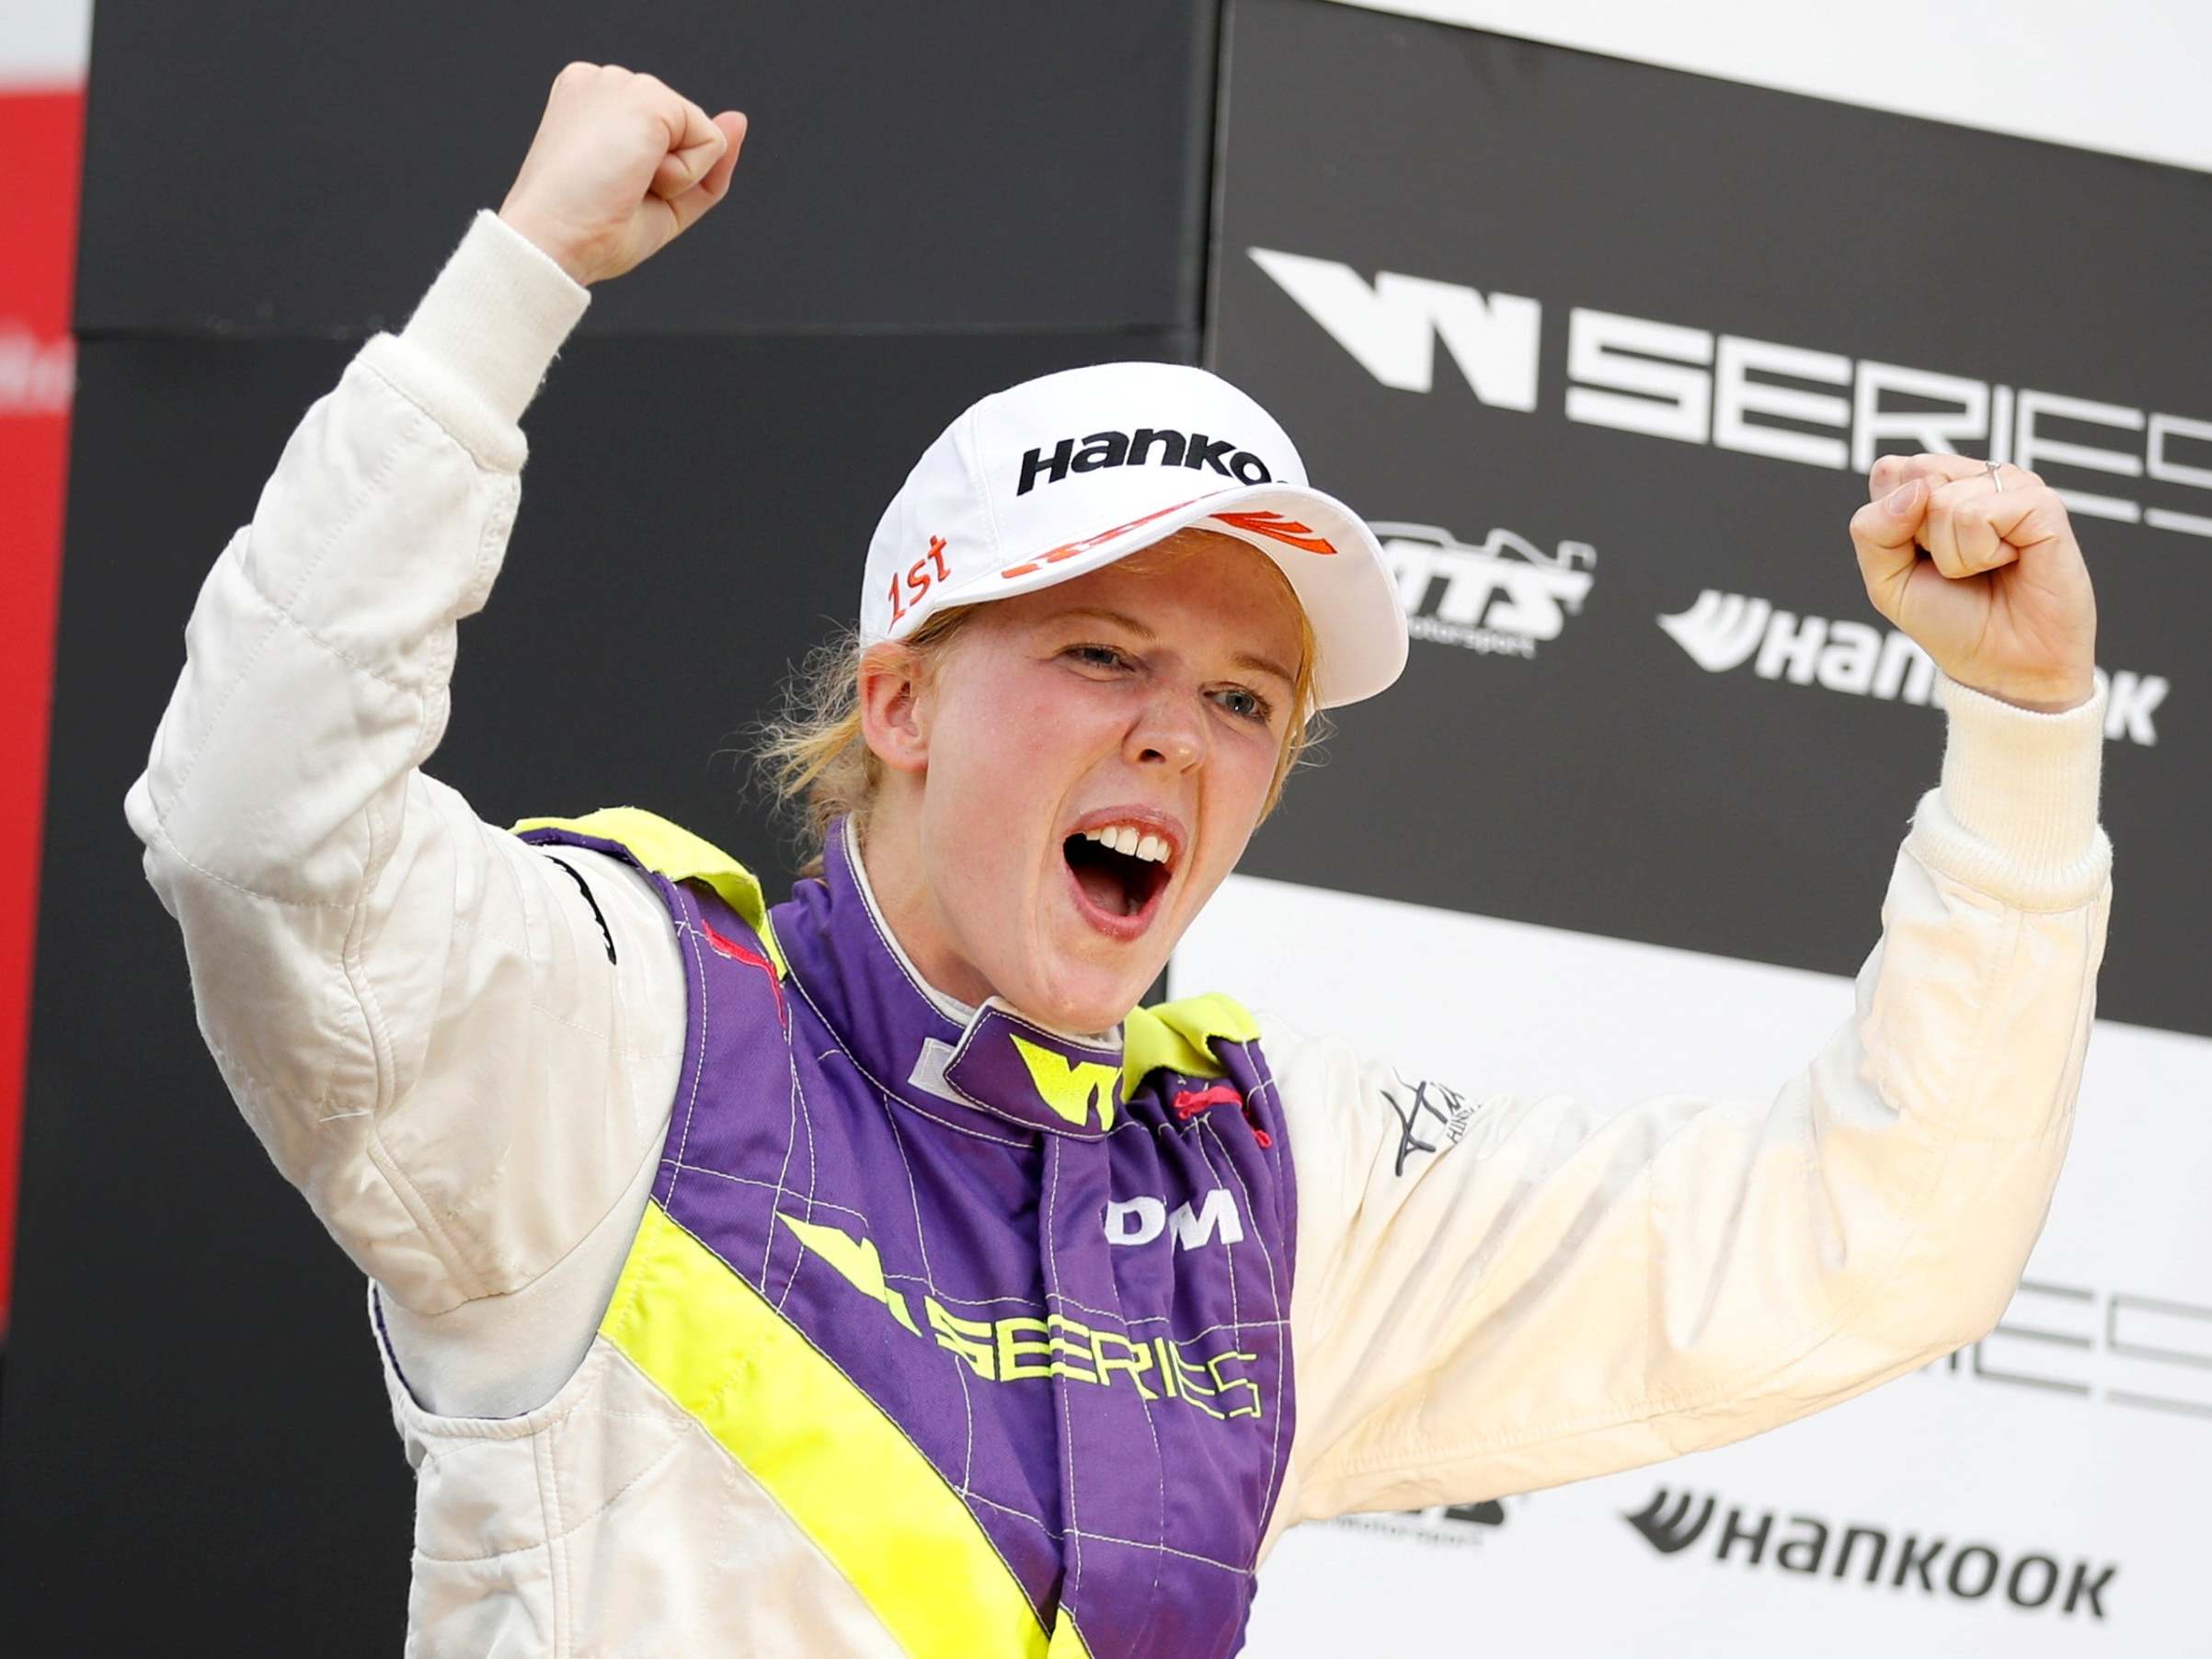 British racer Alice Powell enjoyed a successful first season in the W Series